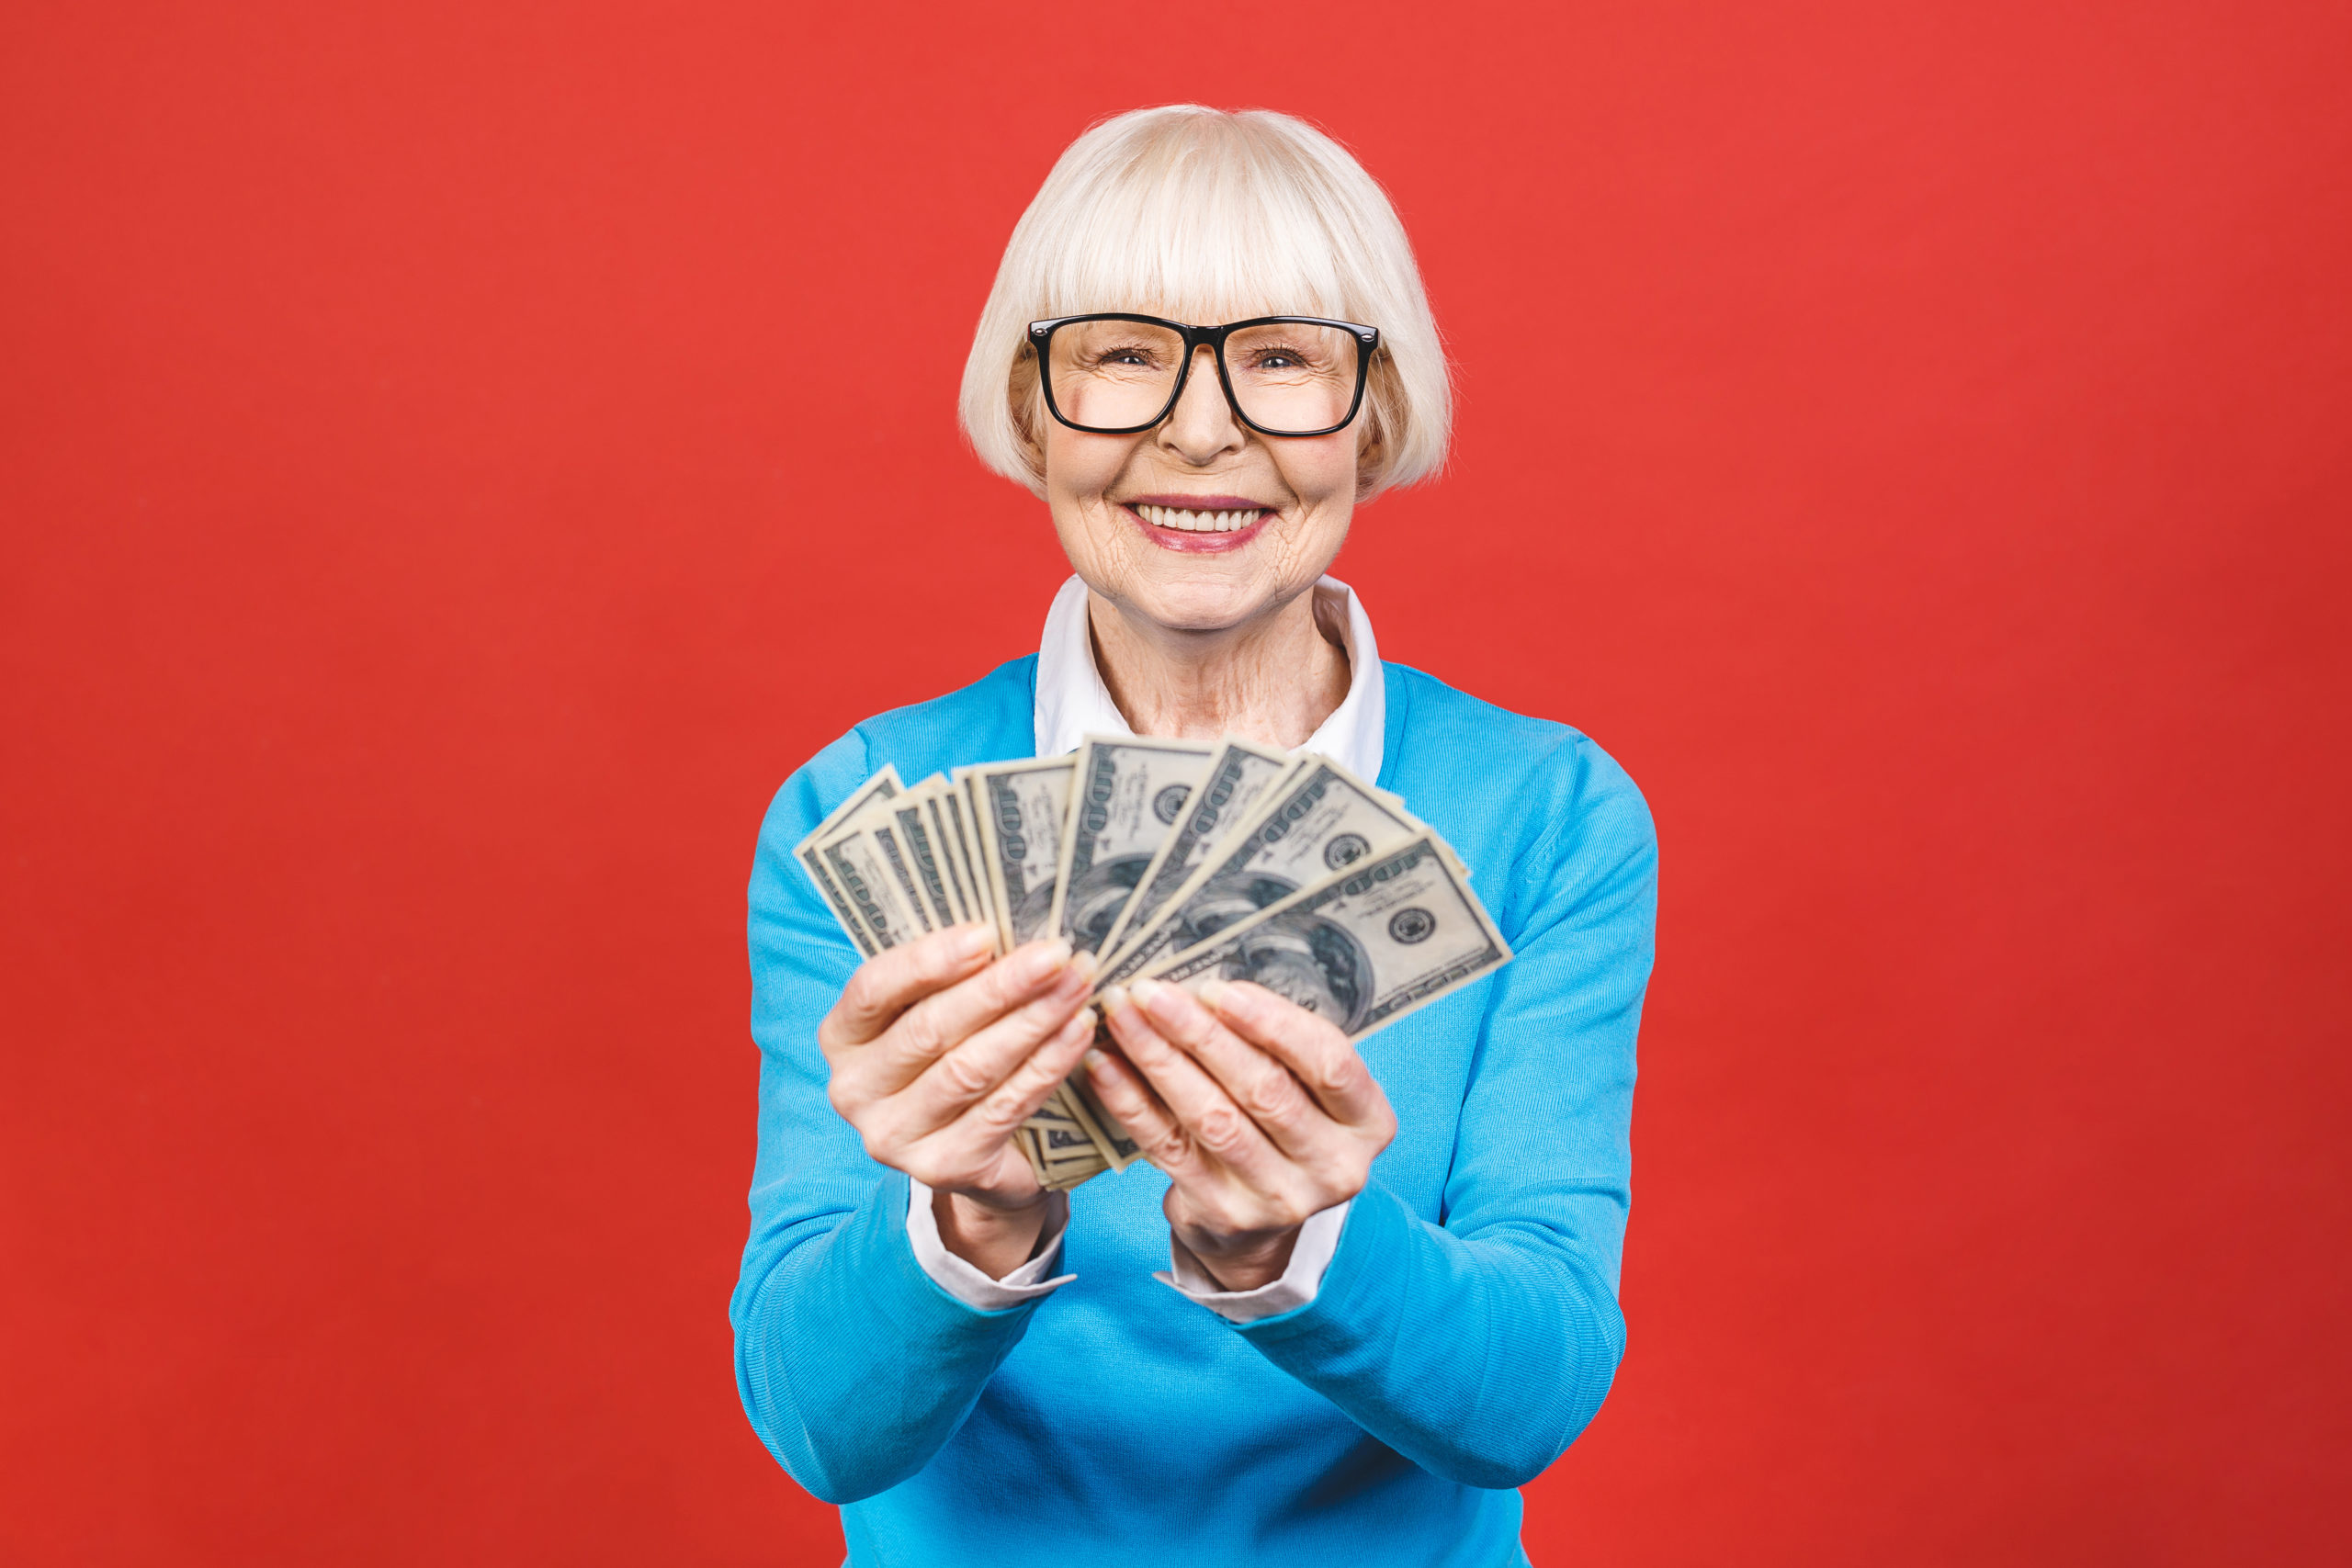 woman excited about stimulus check for seniors